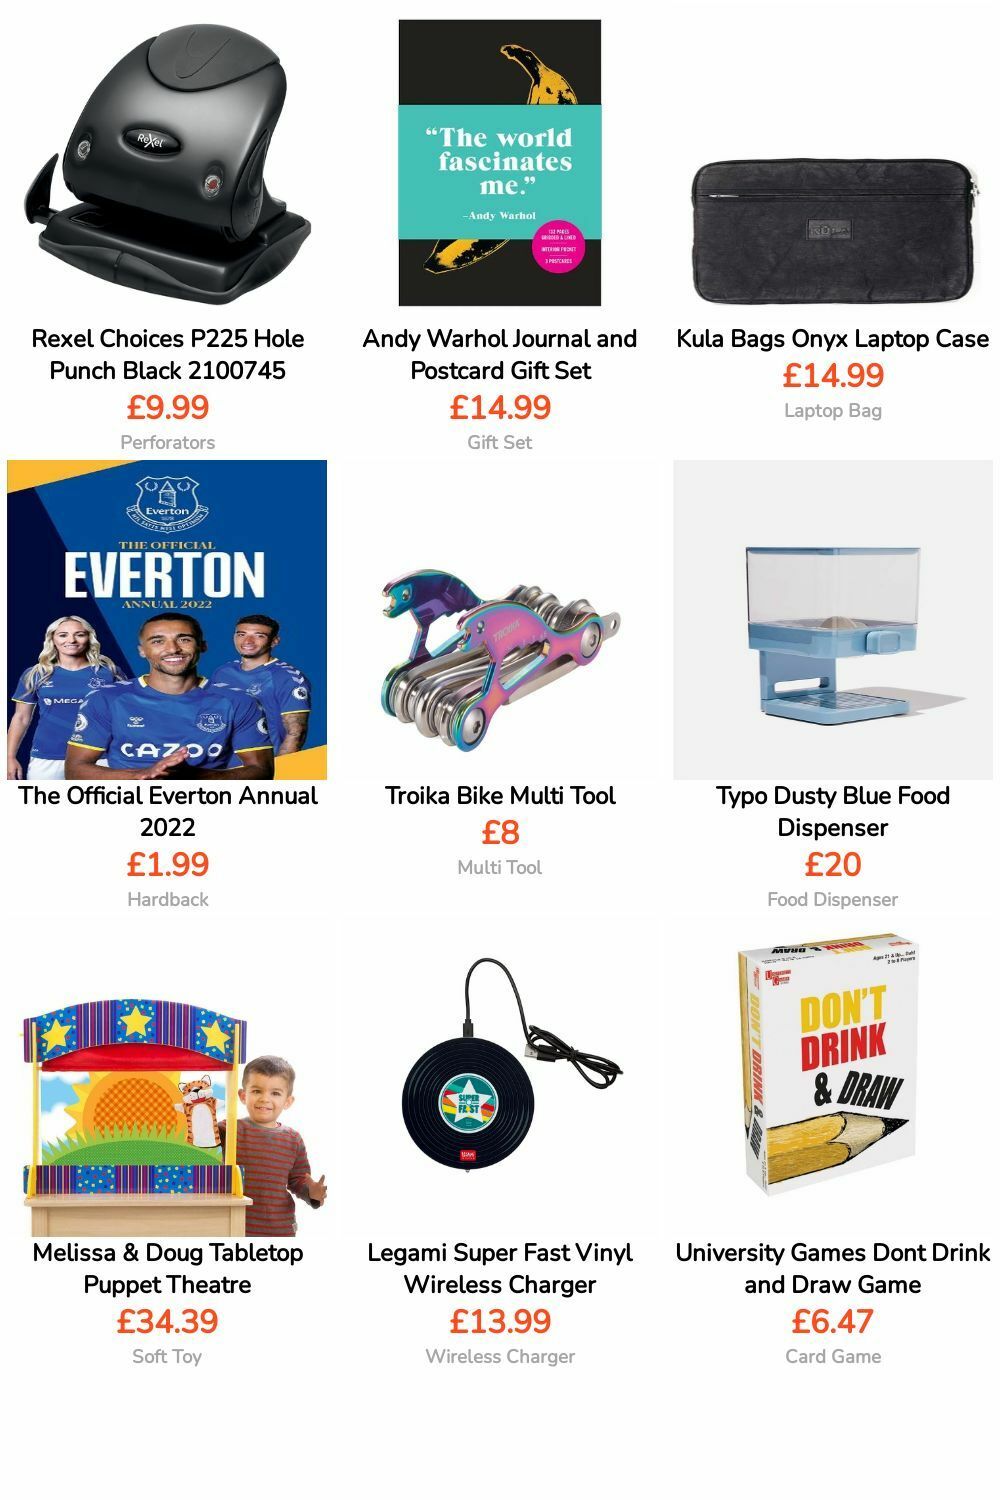 WHSmith Offers from 26 July